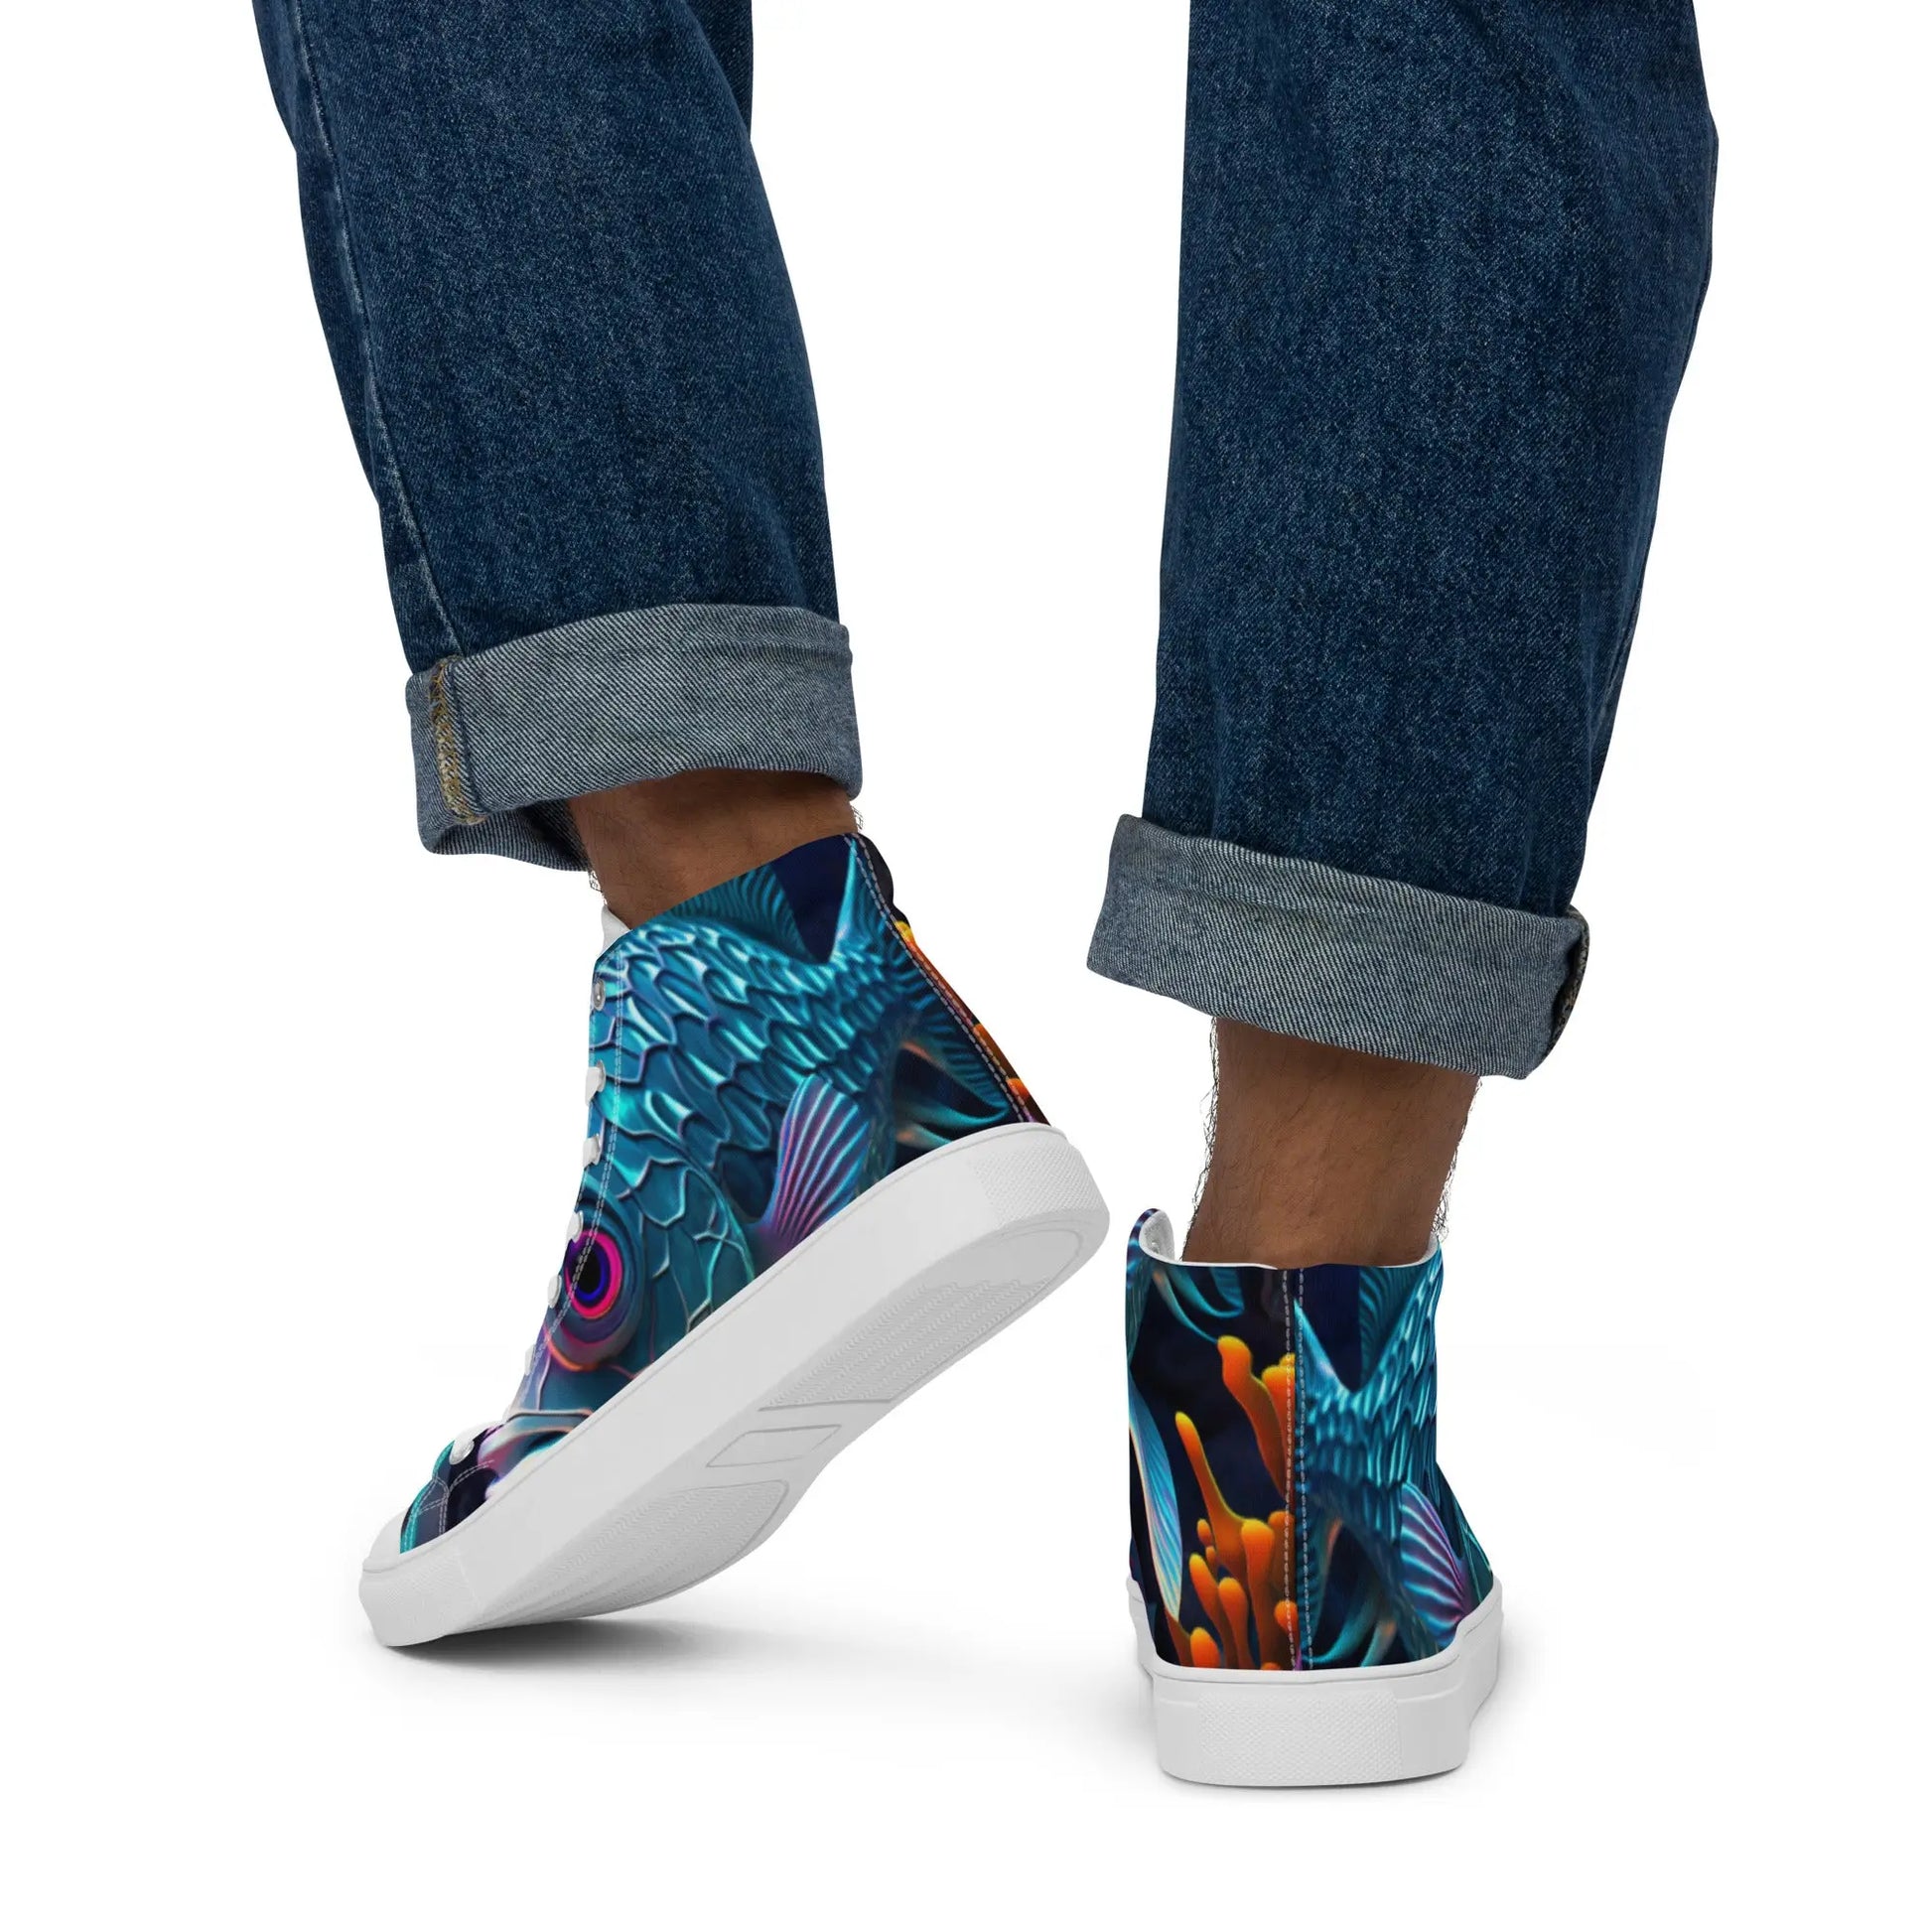 Niji Fish High Top Sneakers: AI-Engineered, Unisex, Step up Your Style Game with a Splash of Color, Animal Print, Durable, Comfortable, SeaLife, Art-Inspired Footwear Kinetic Footwear